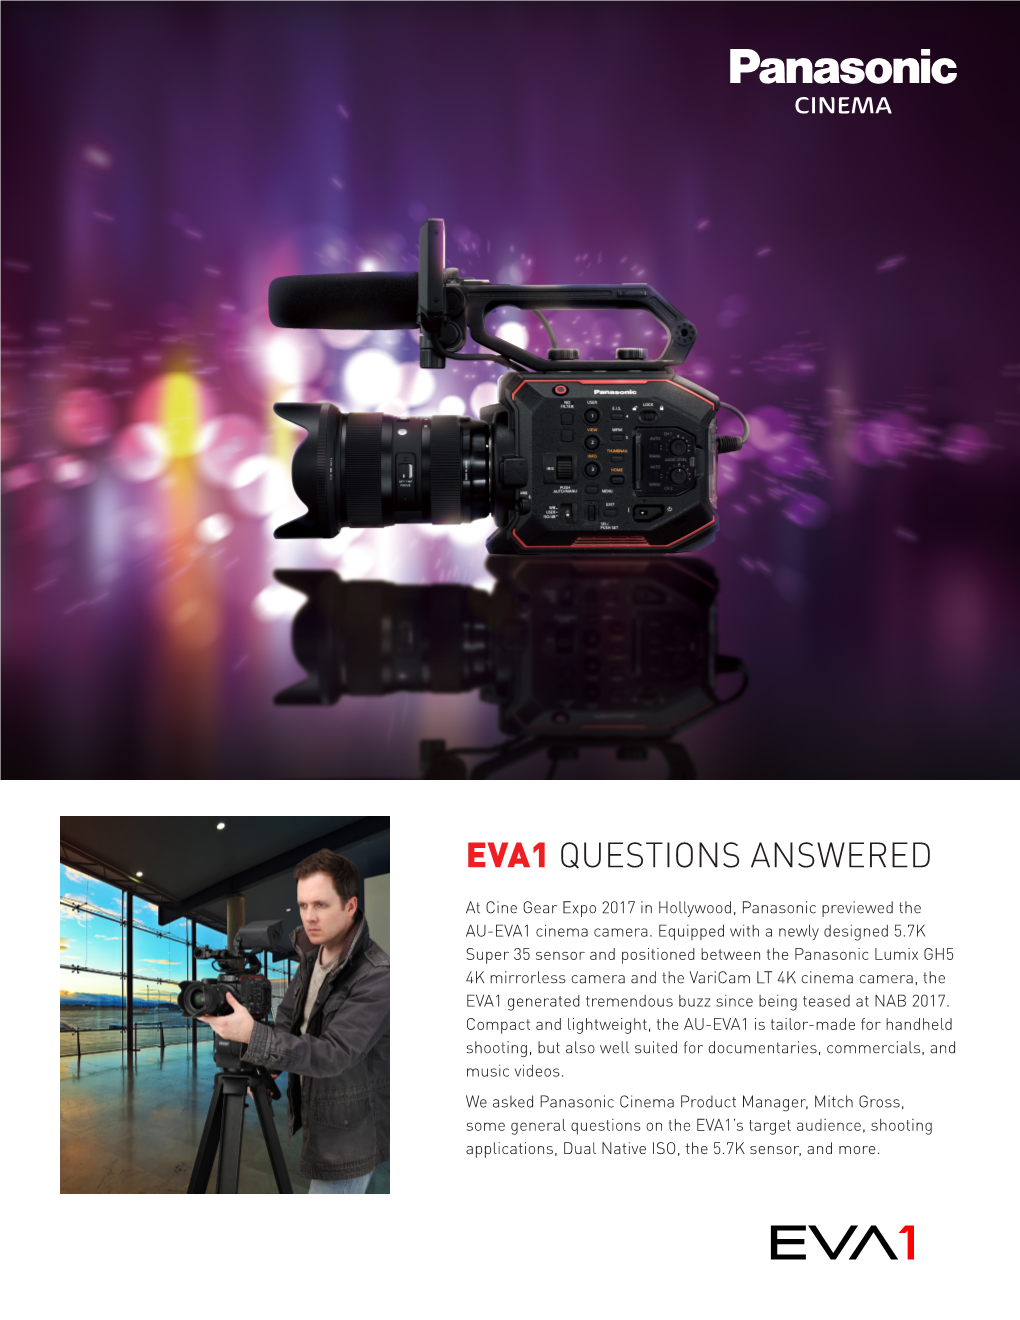 Eva1 Questions Answered